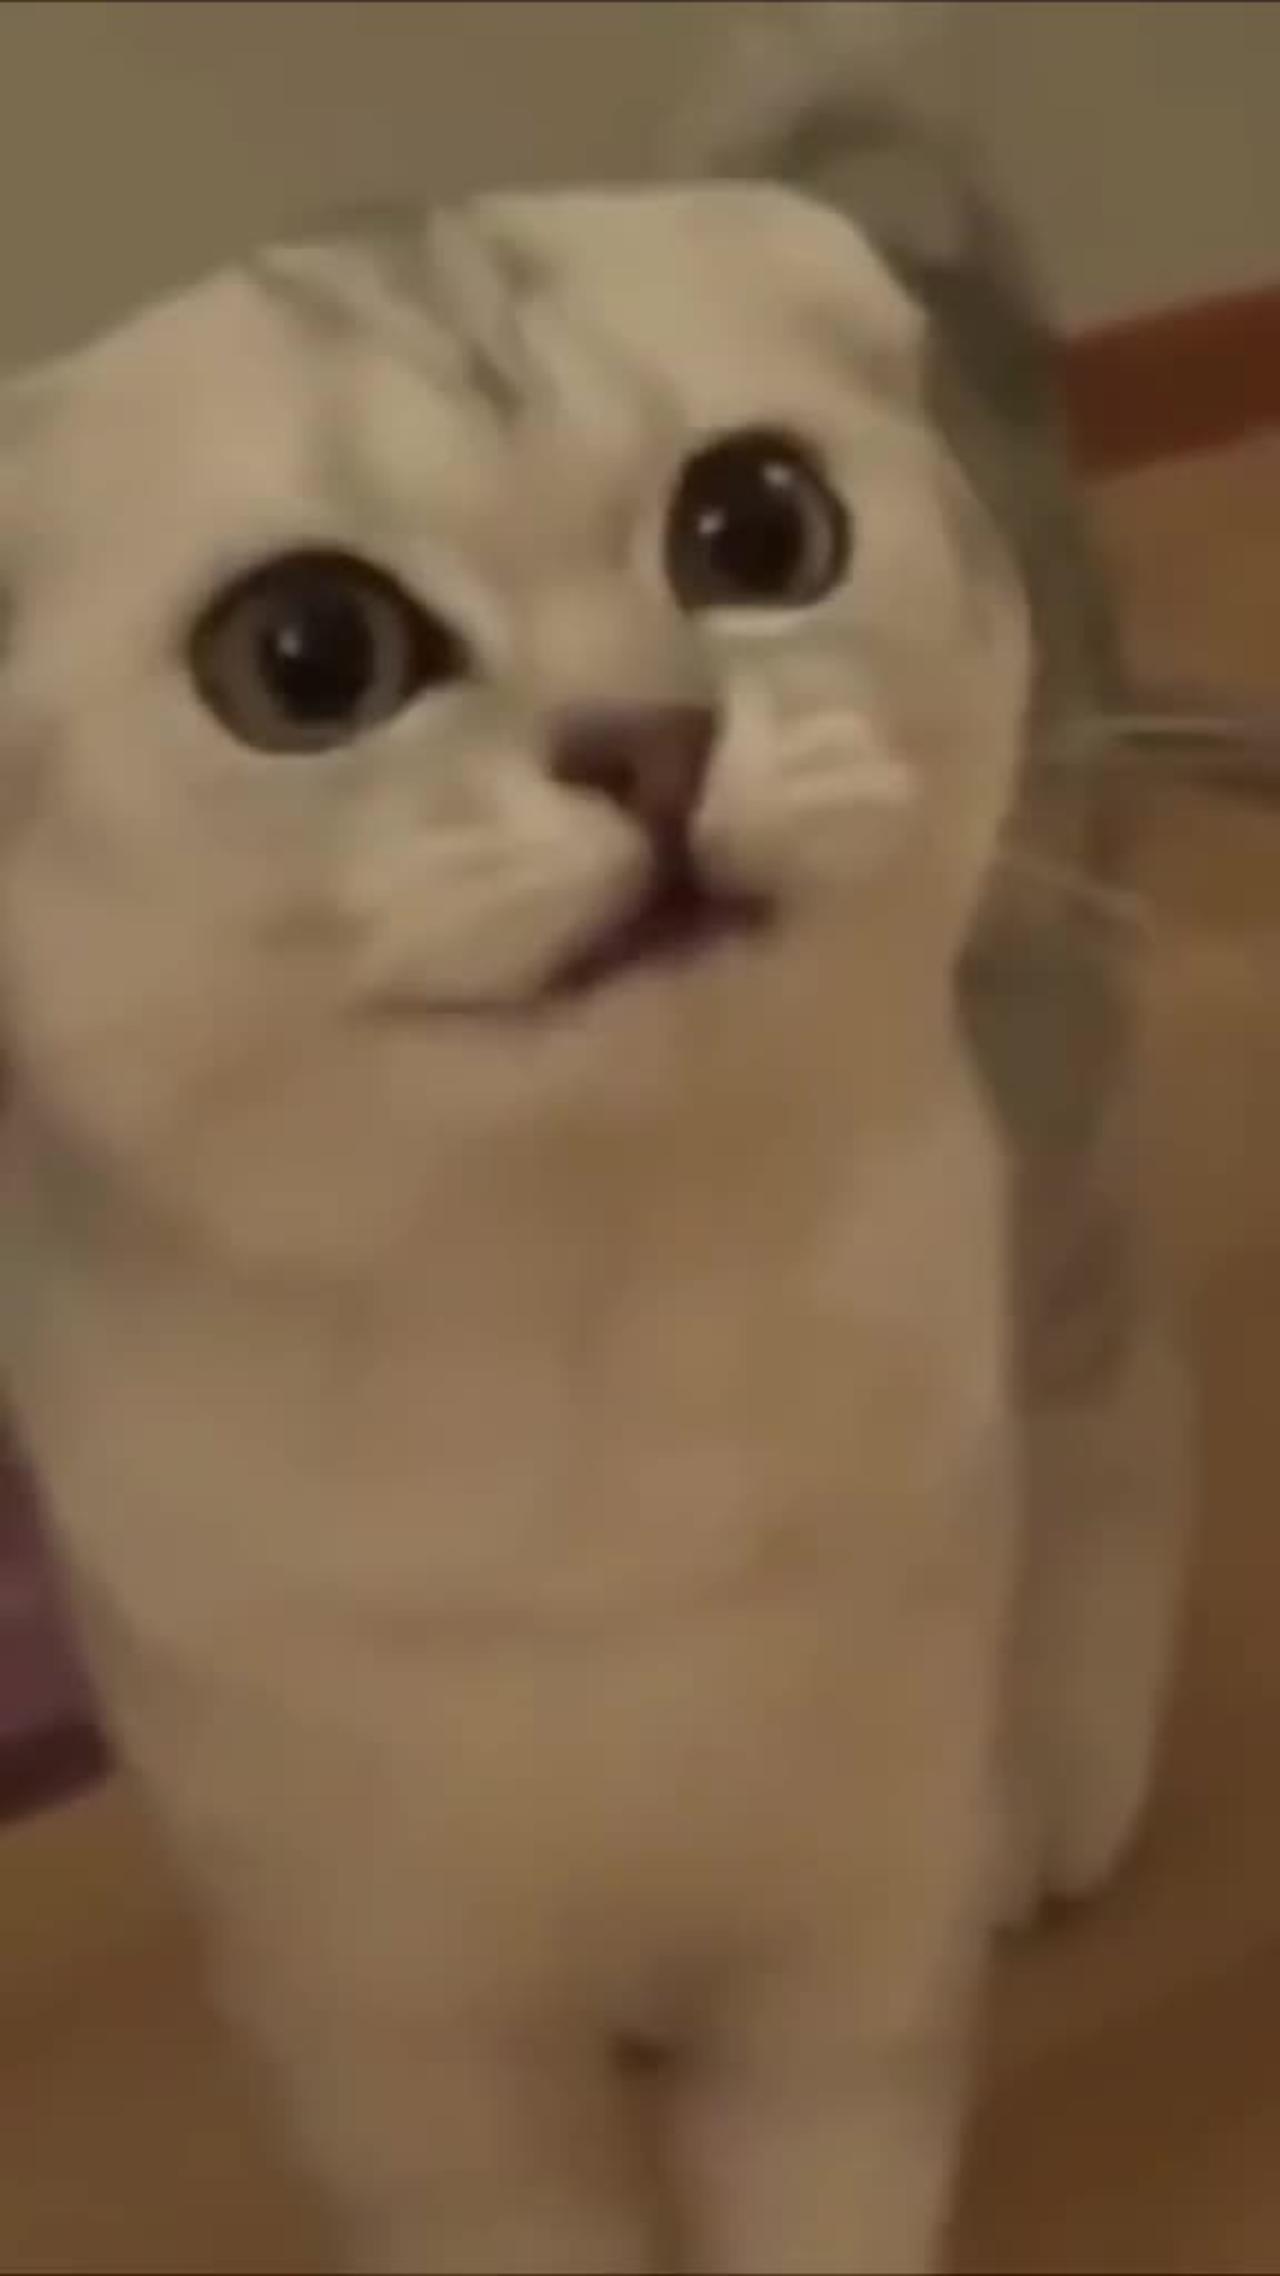 "Sweet and Silly: Watch This Cute Cat Meowing and Being Playful"